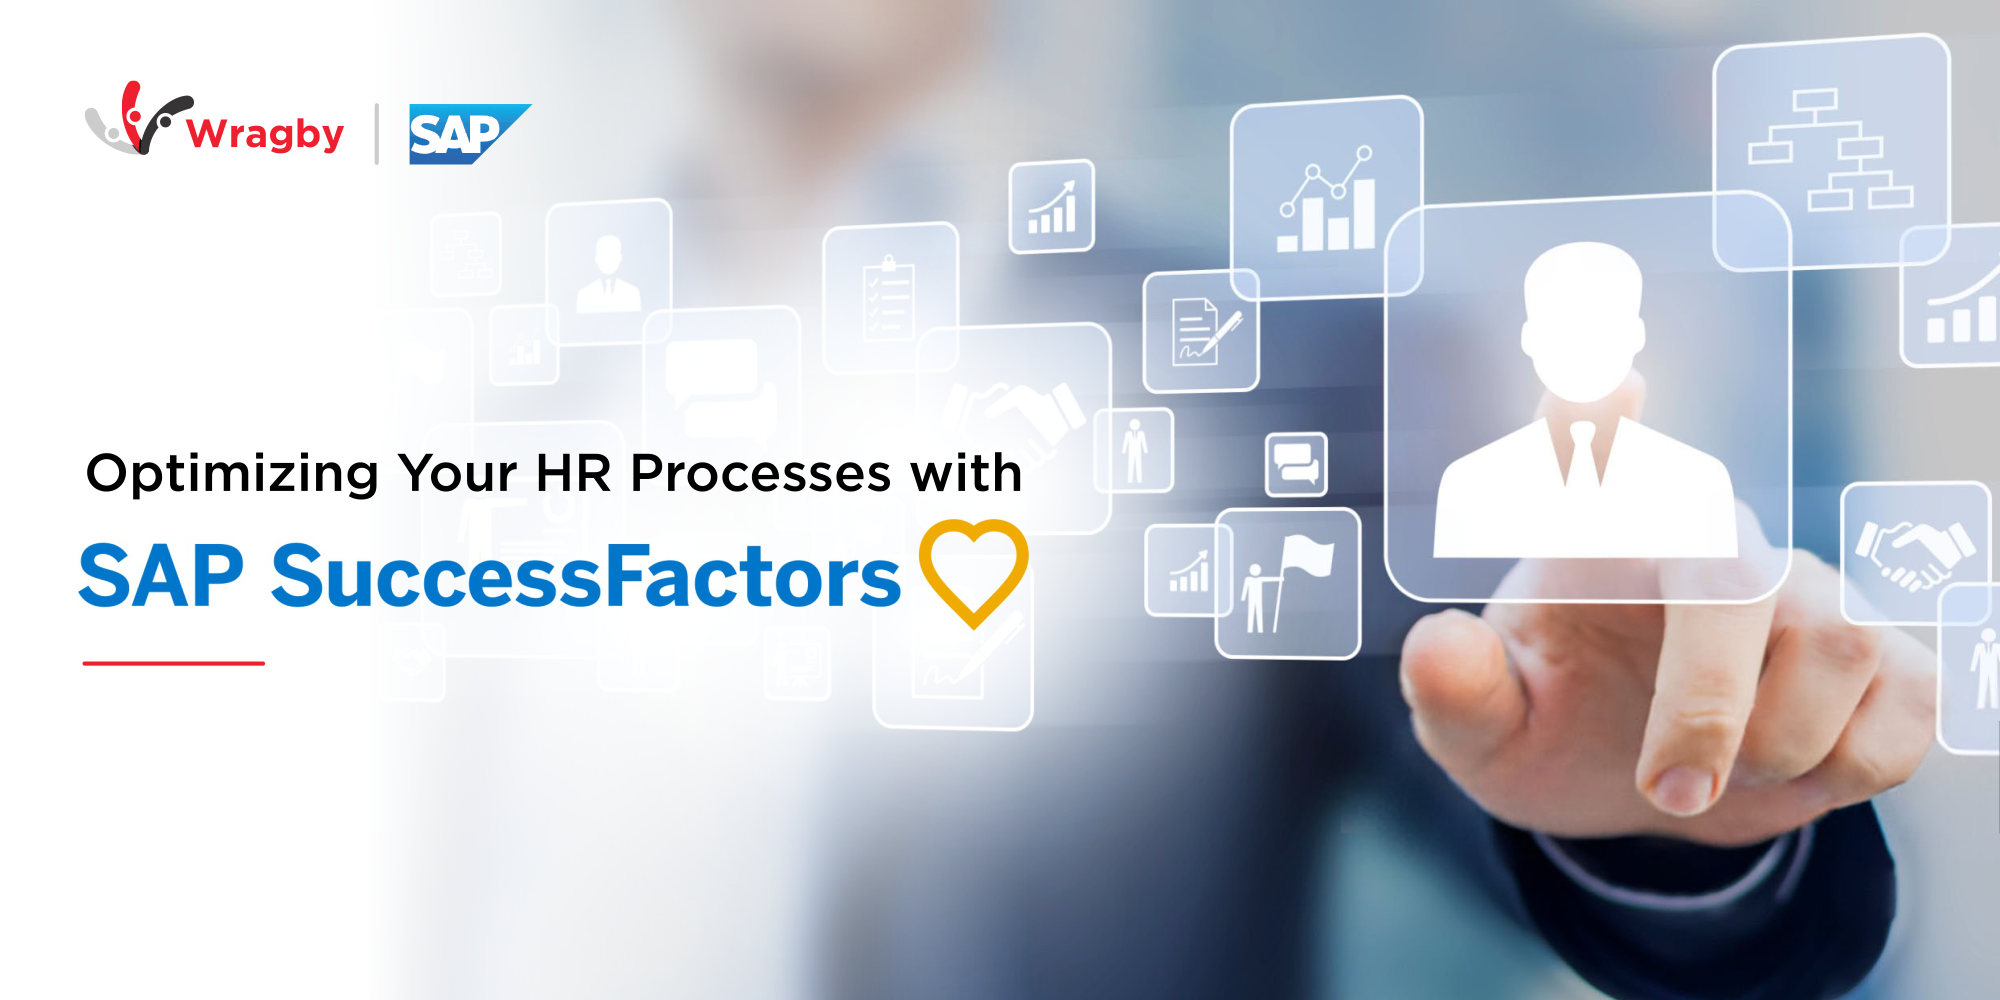 Optimizing your HR Processes with SAP Successfactors - Wragby